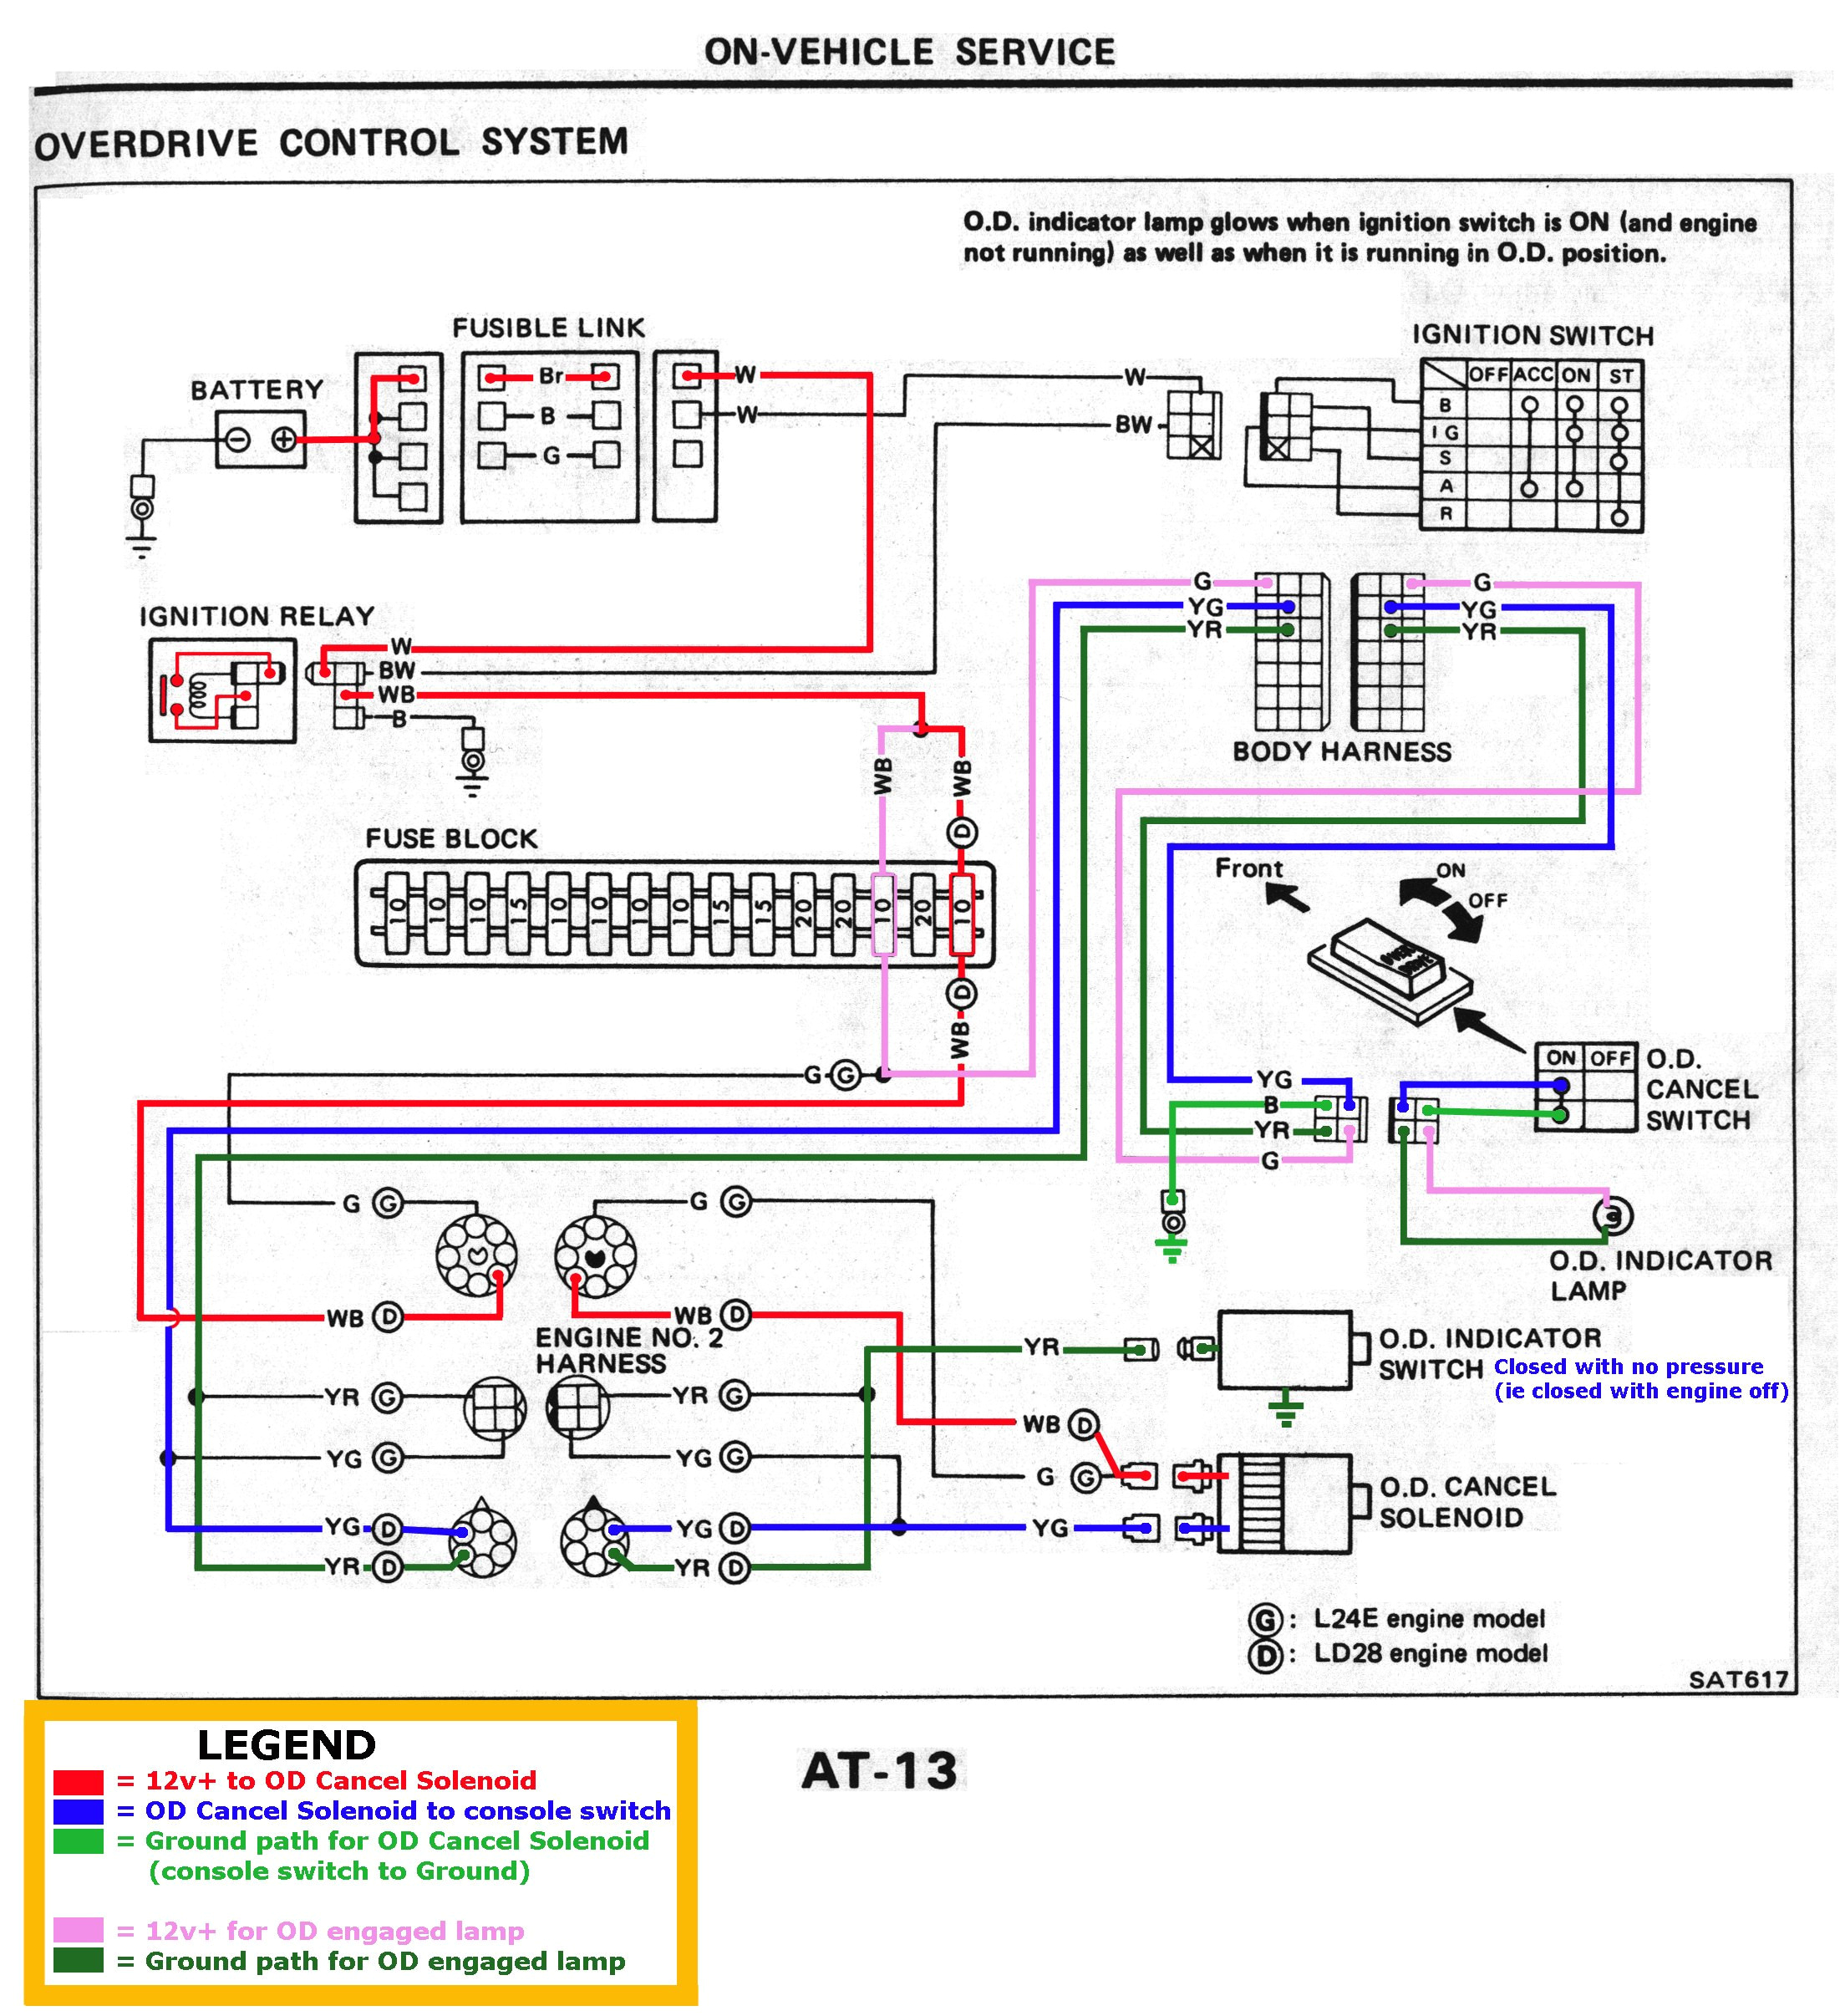 wiring diagram for 1990 tracker wiring diagram sheet geo tracker wiring wiring diagram wiring diagram for